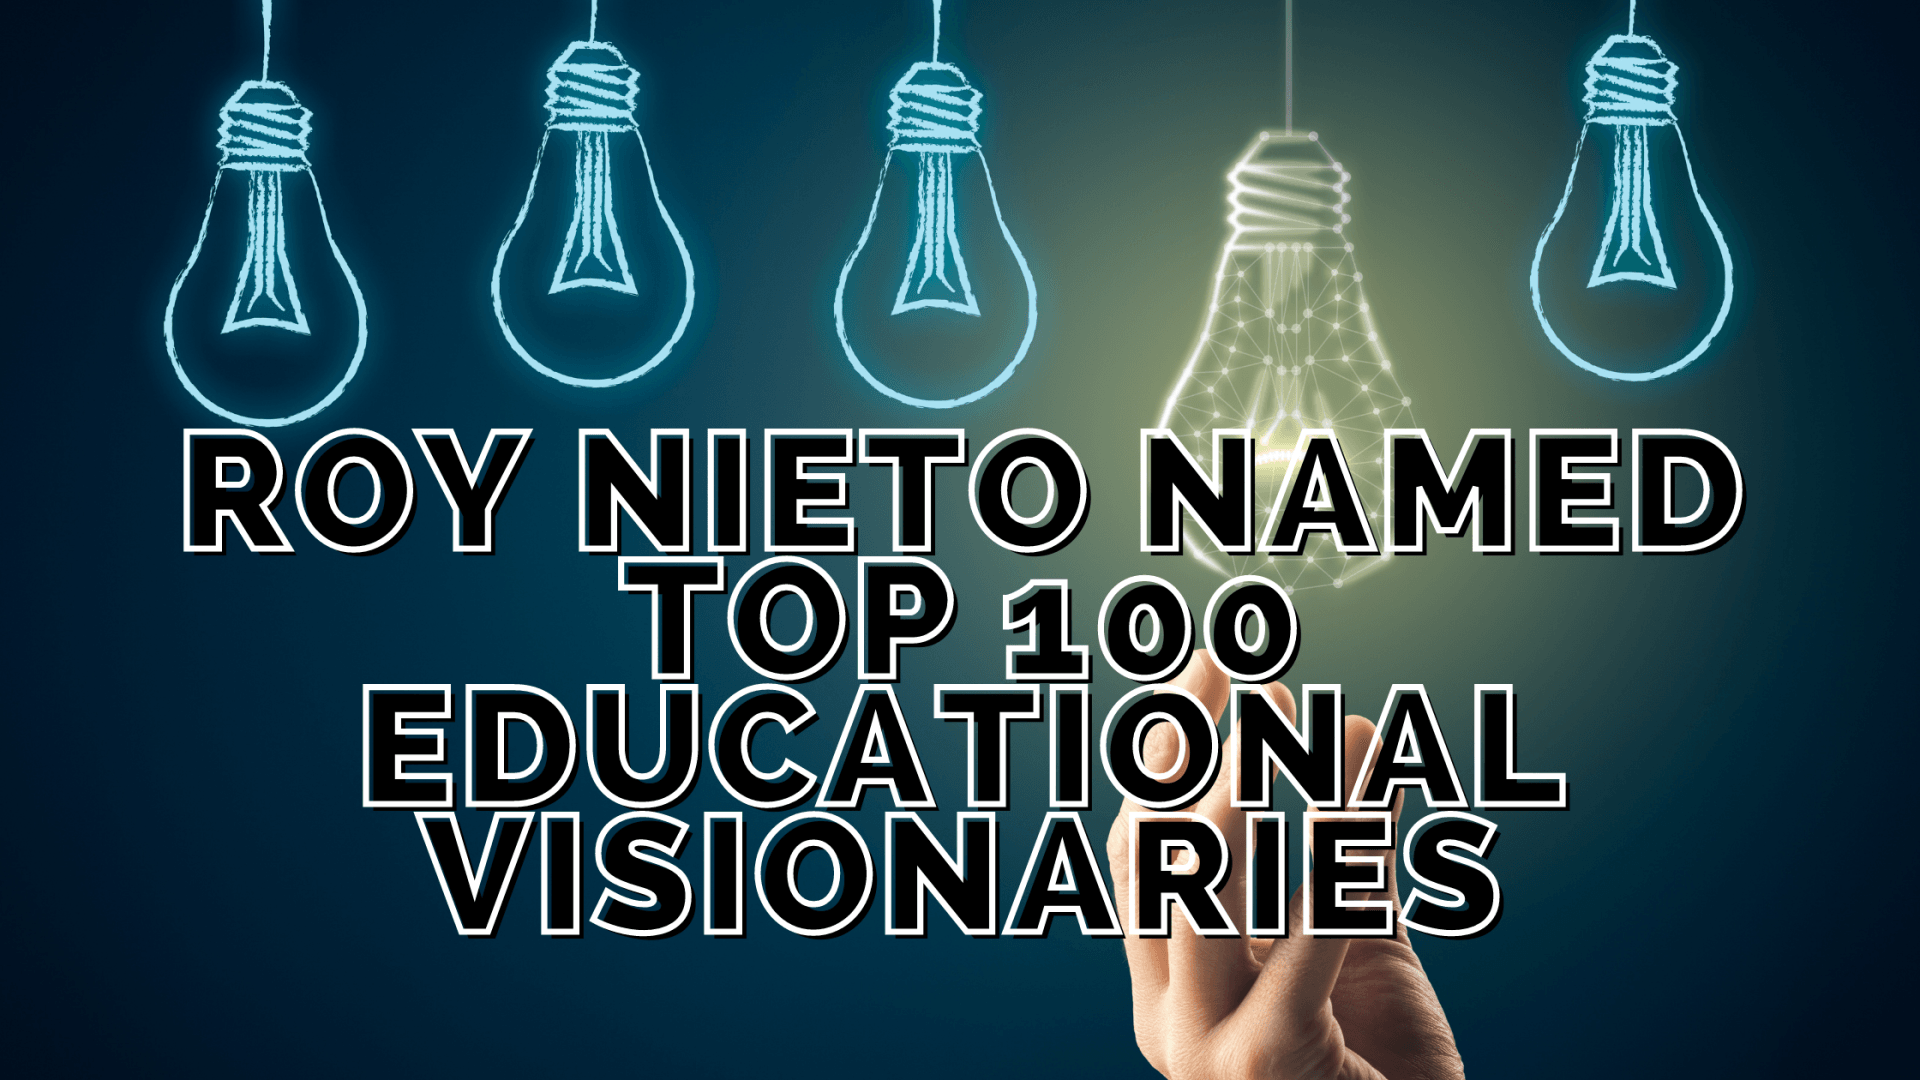 Roy Nieto Being one of the Top 100 Educational Visionaries by the GFEL